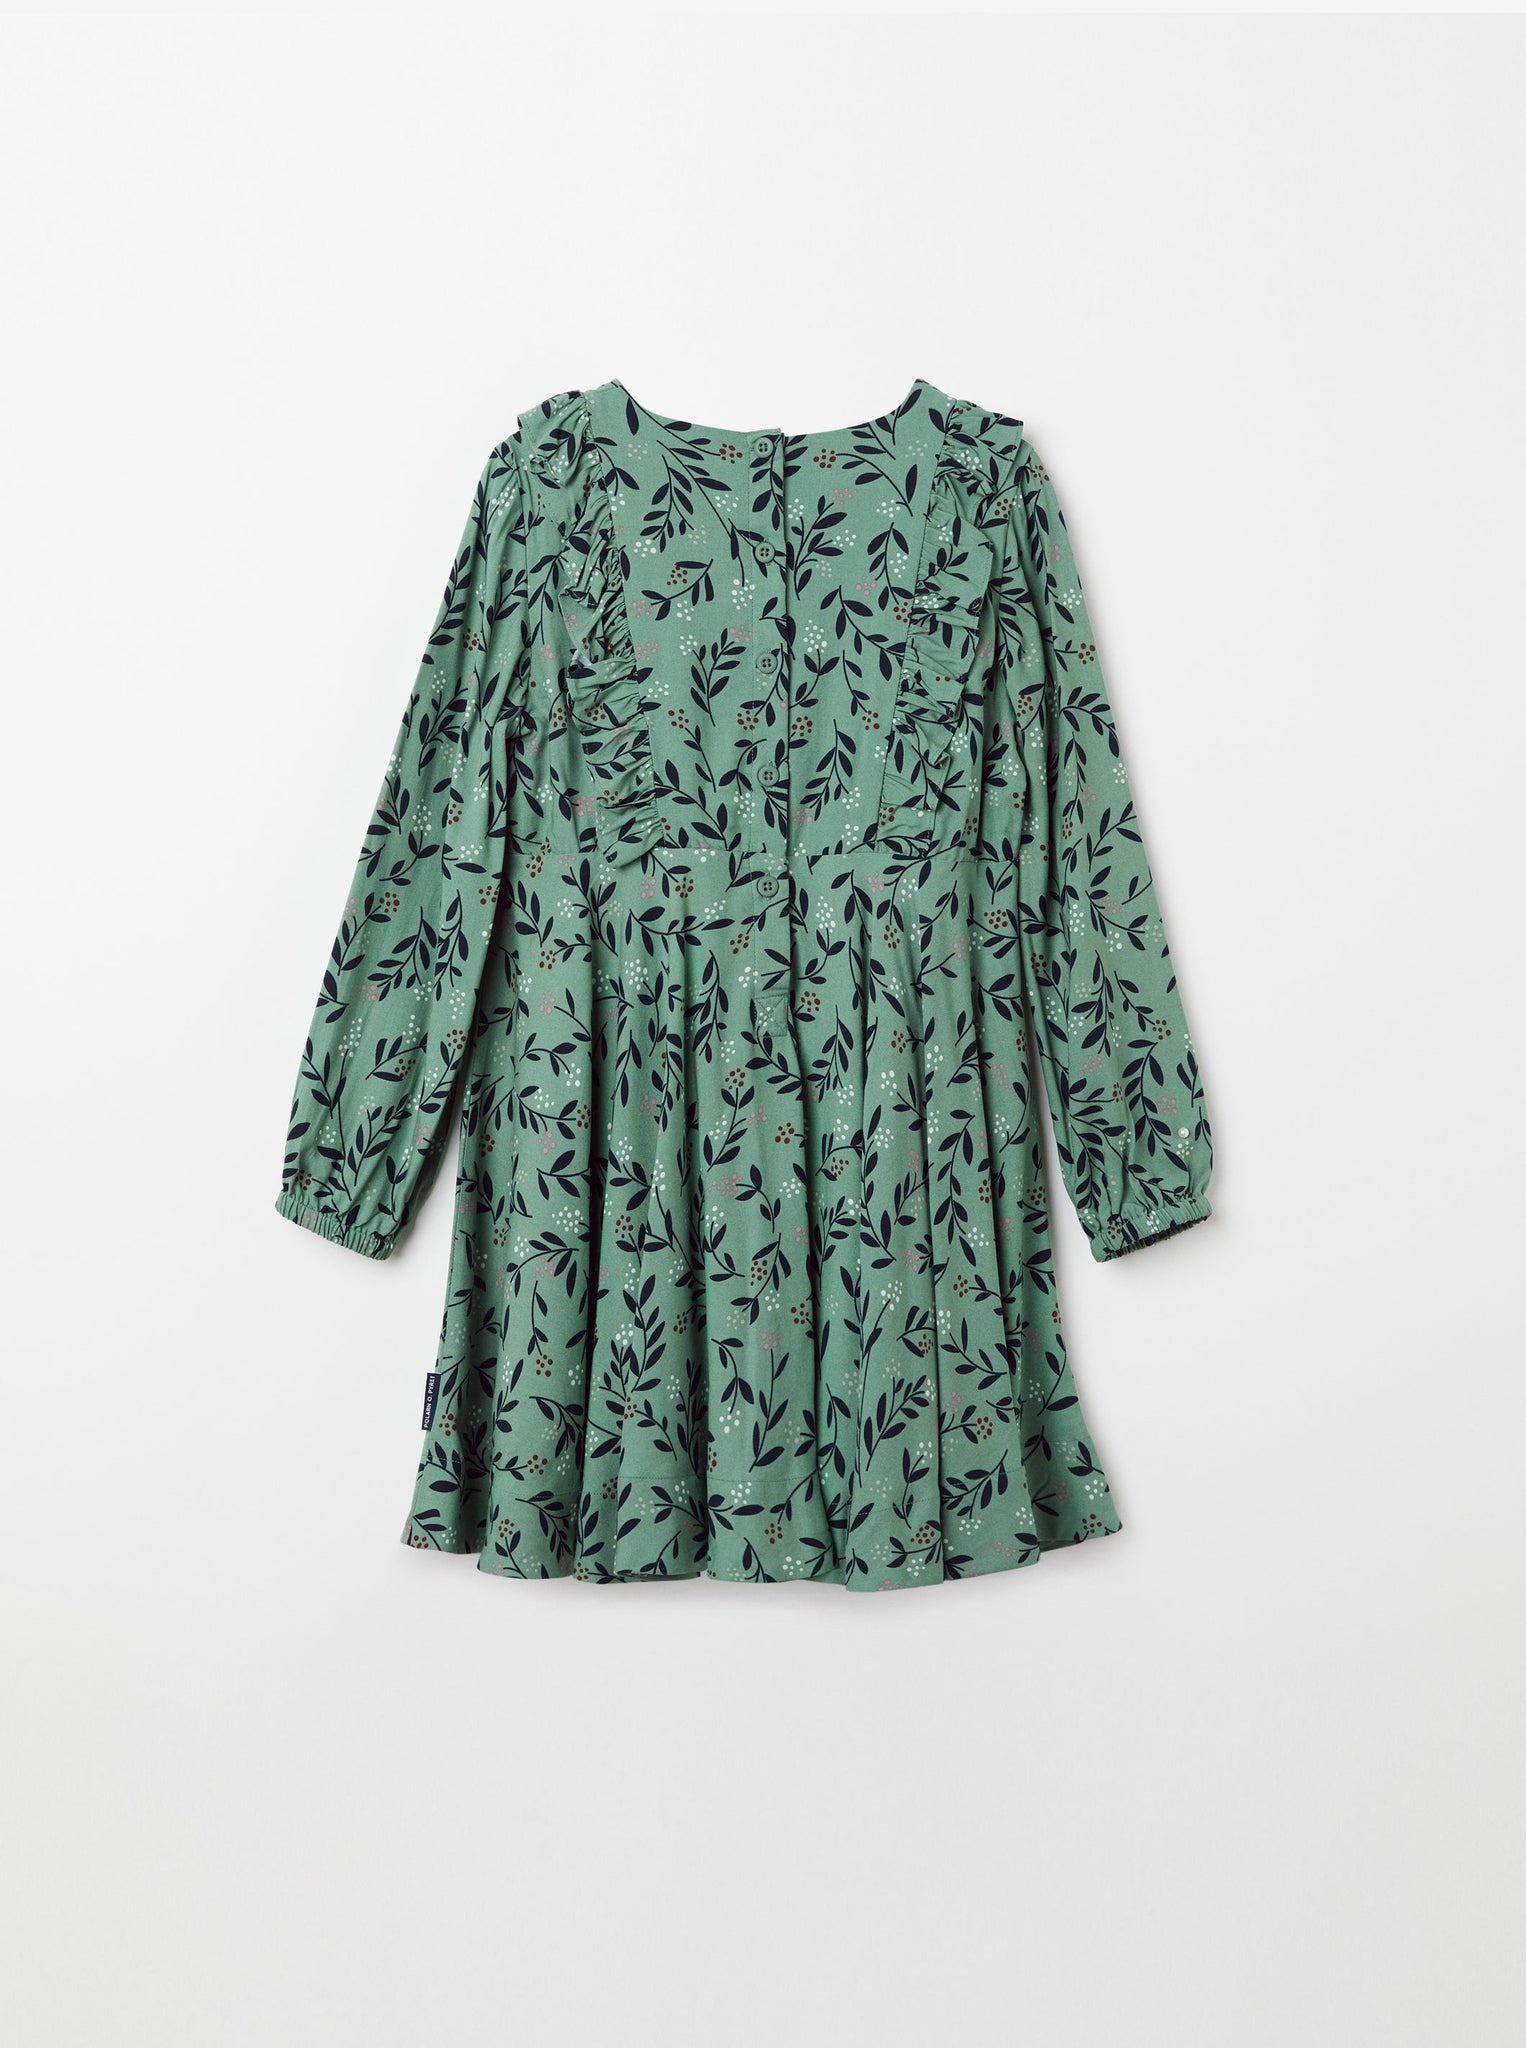 Leaf Print Green Kids Dress from the Polarn O. Pyret kidswear collection. Nordic kids clothes made from sustainable sources.